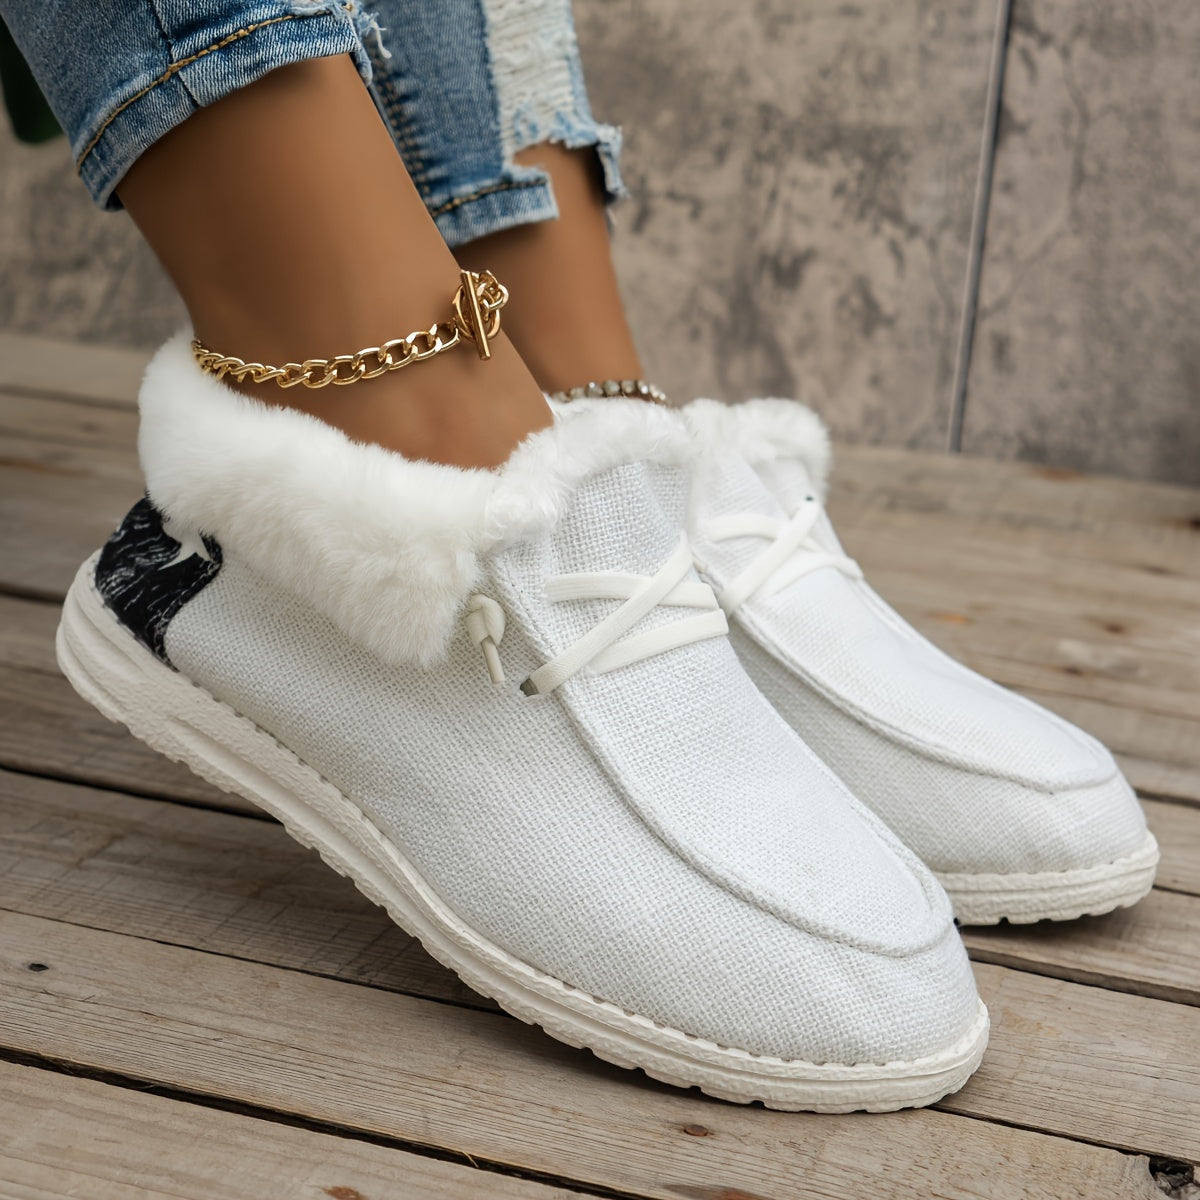 Women's Fluffy Fleece Lined Canvas Shoes, Thermal Slip On Low Top Shoes, Winter Warm Flat Shoes